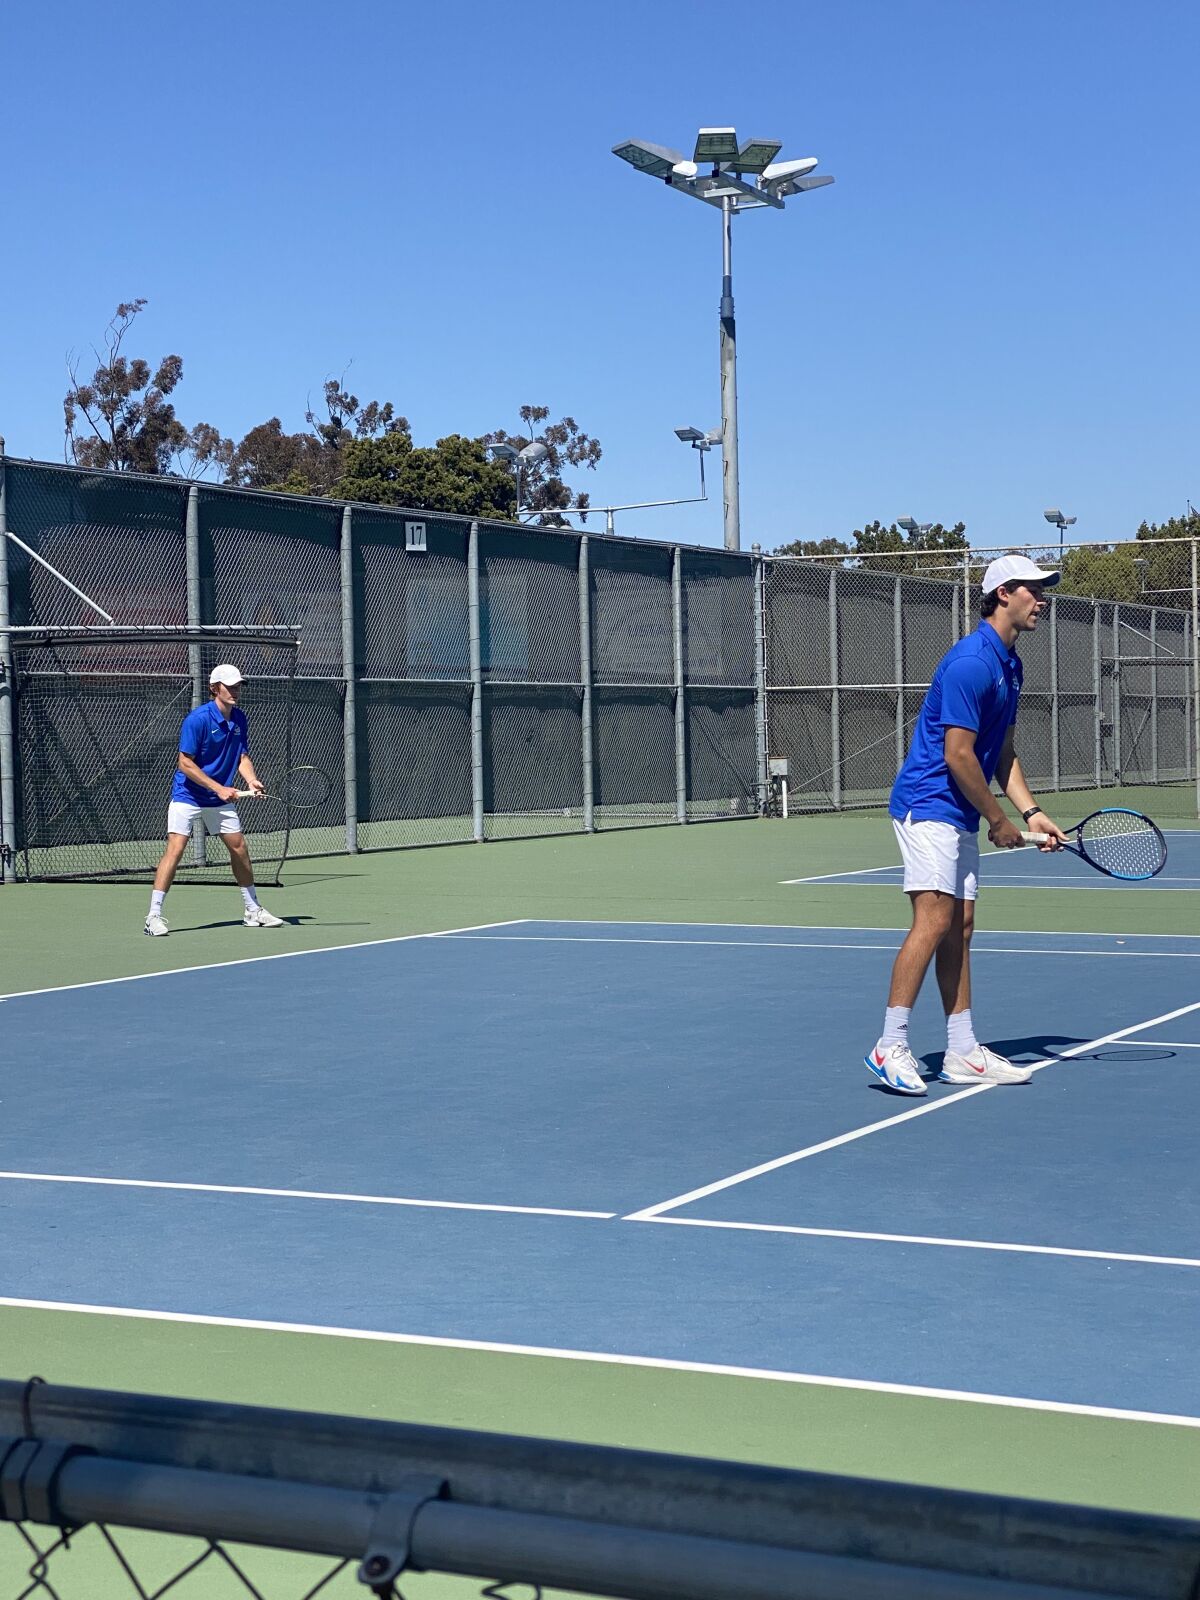 Camden French and Dante Schrantz were once rivals on the court but have played doubles together the past two years.